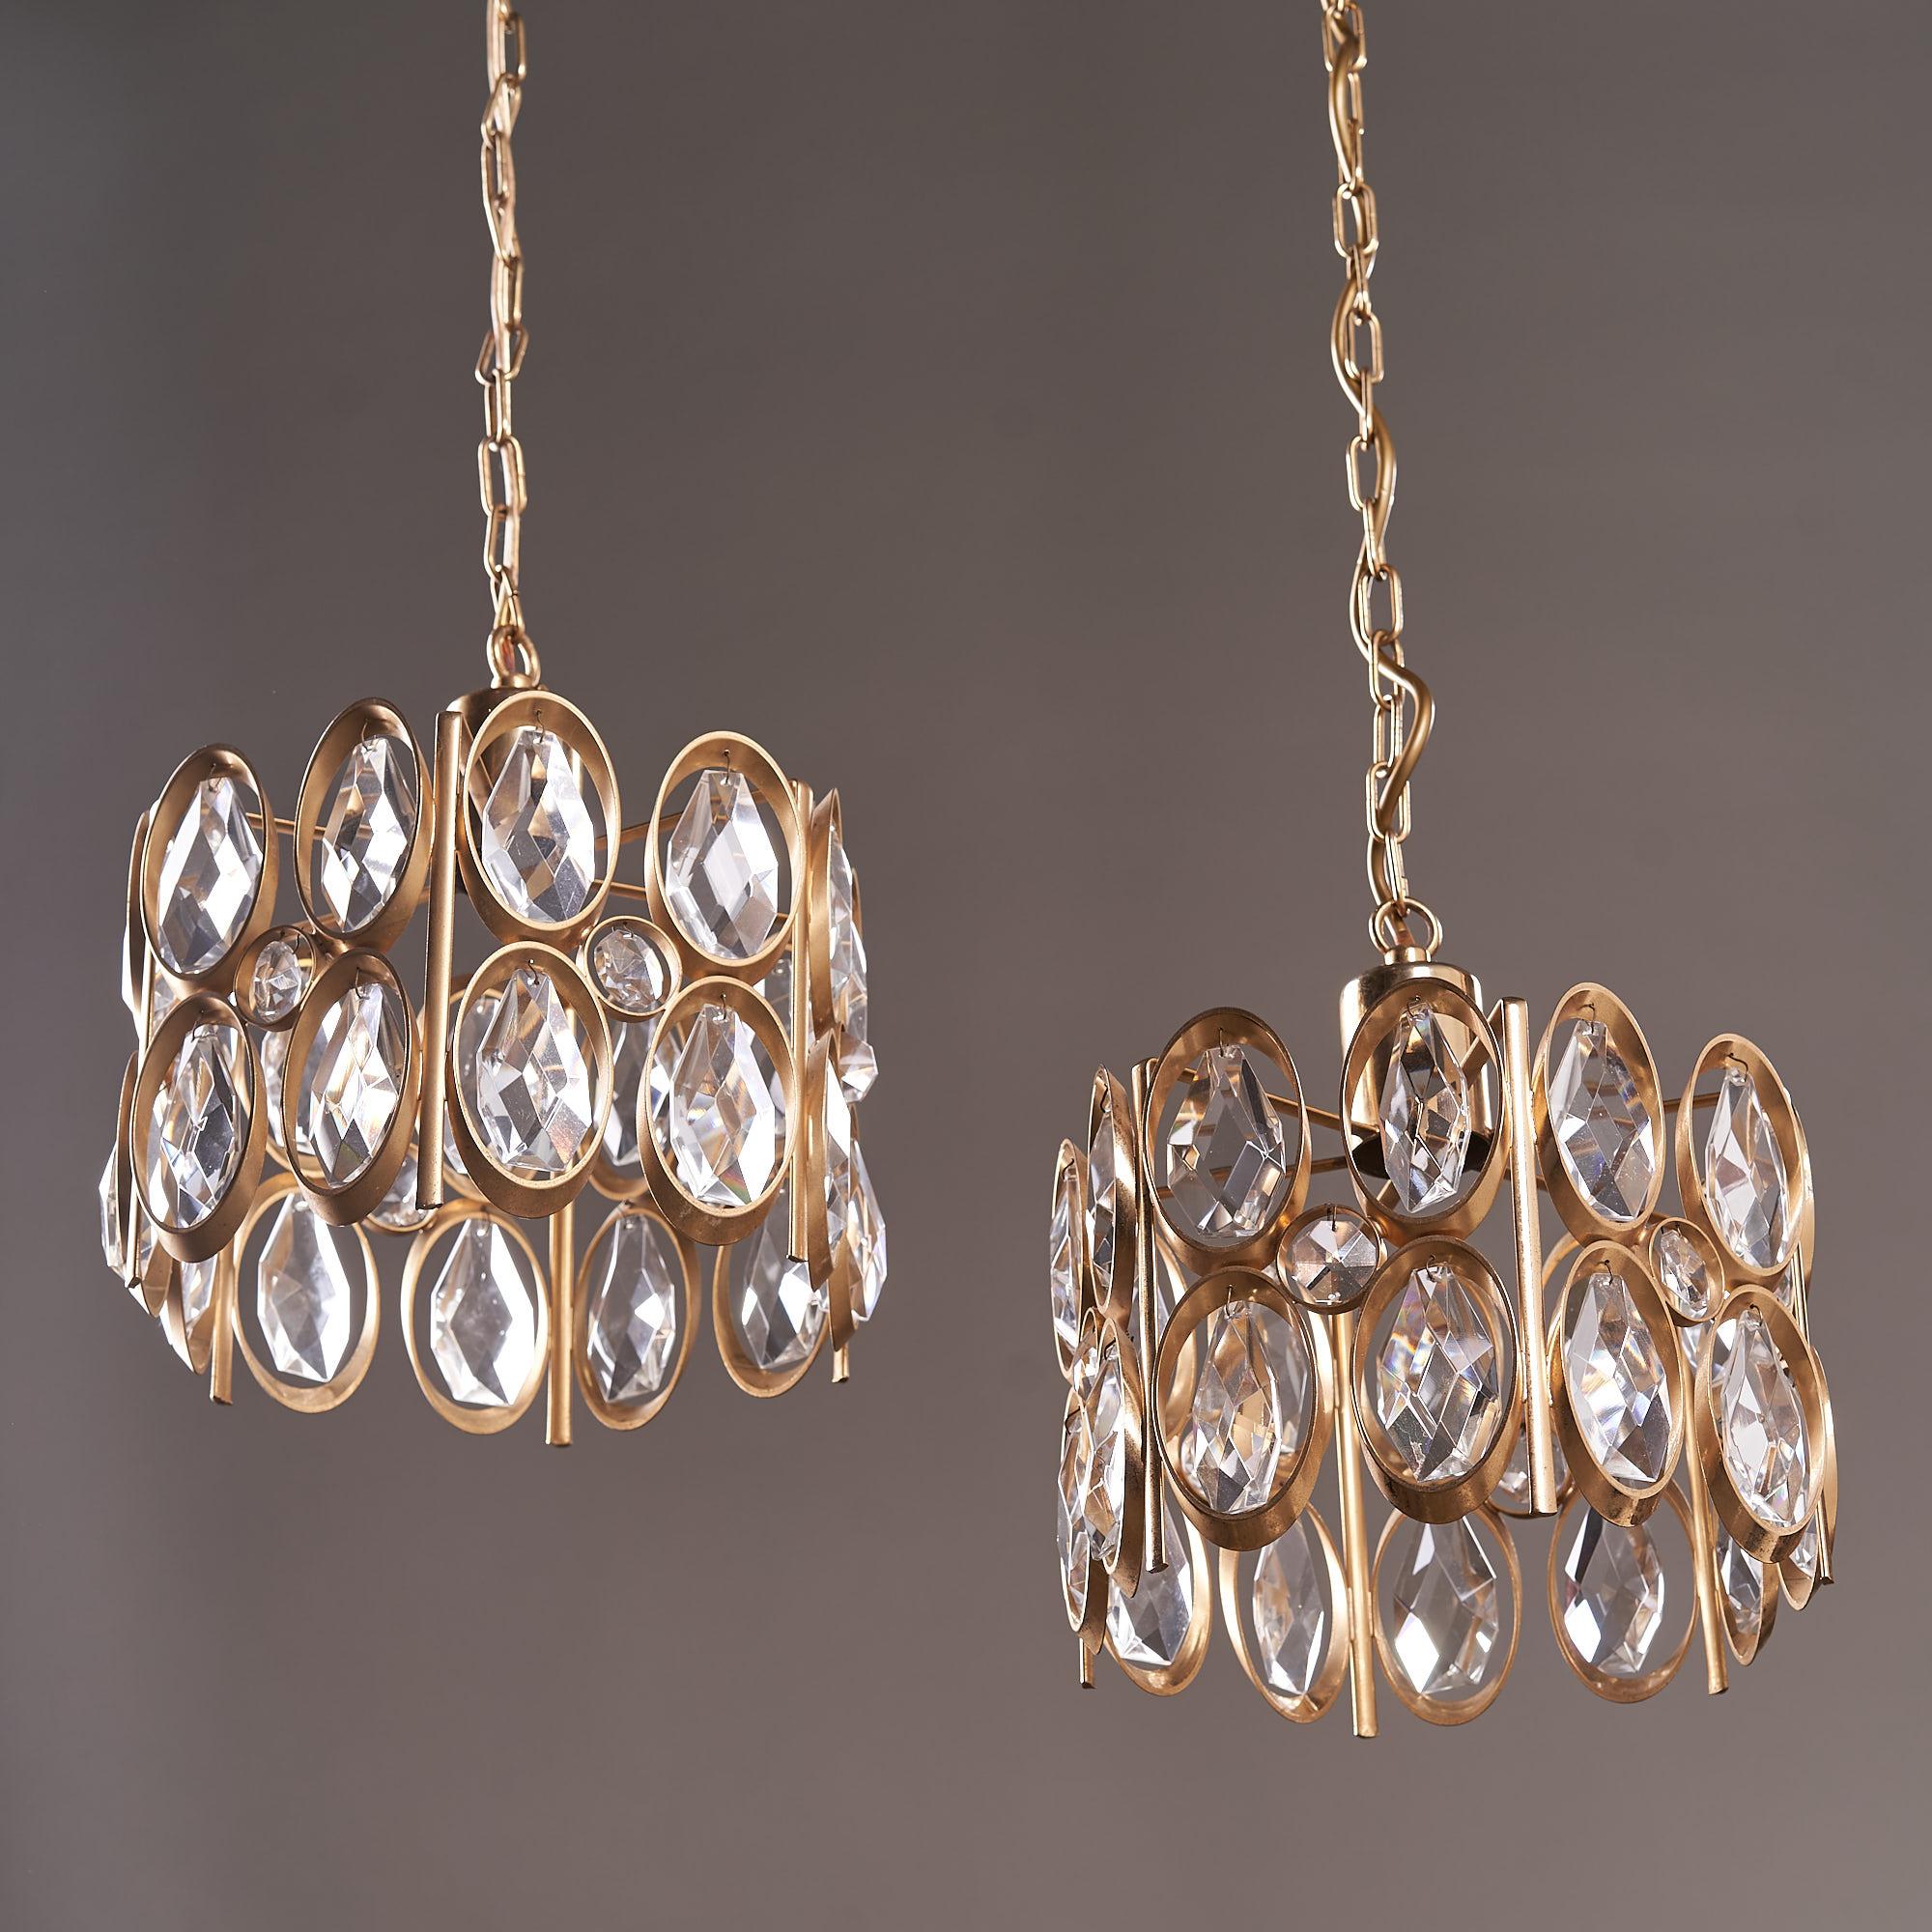 A pair of Hollywood Regency, gold-plated, brass framed, glass crystal chandeliers by German designer Palwa, circa 1960.    
  